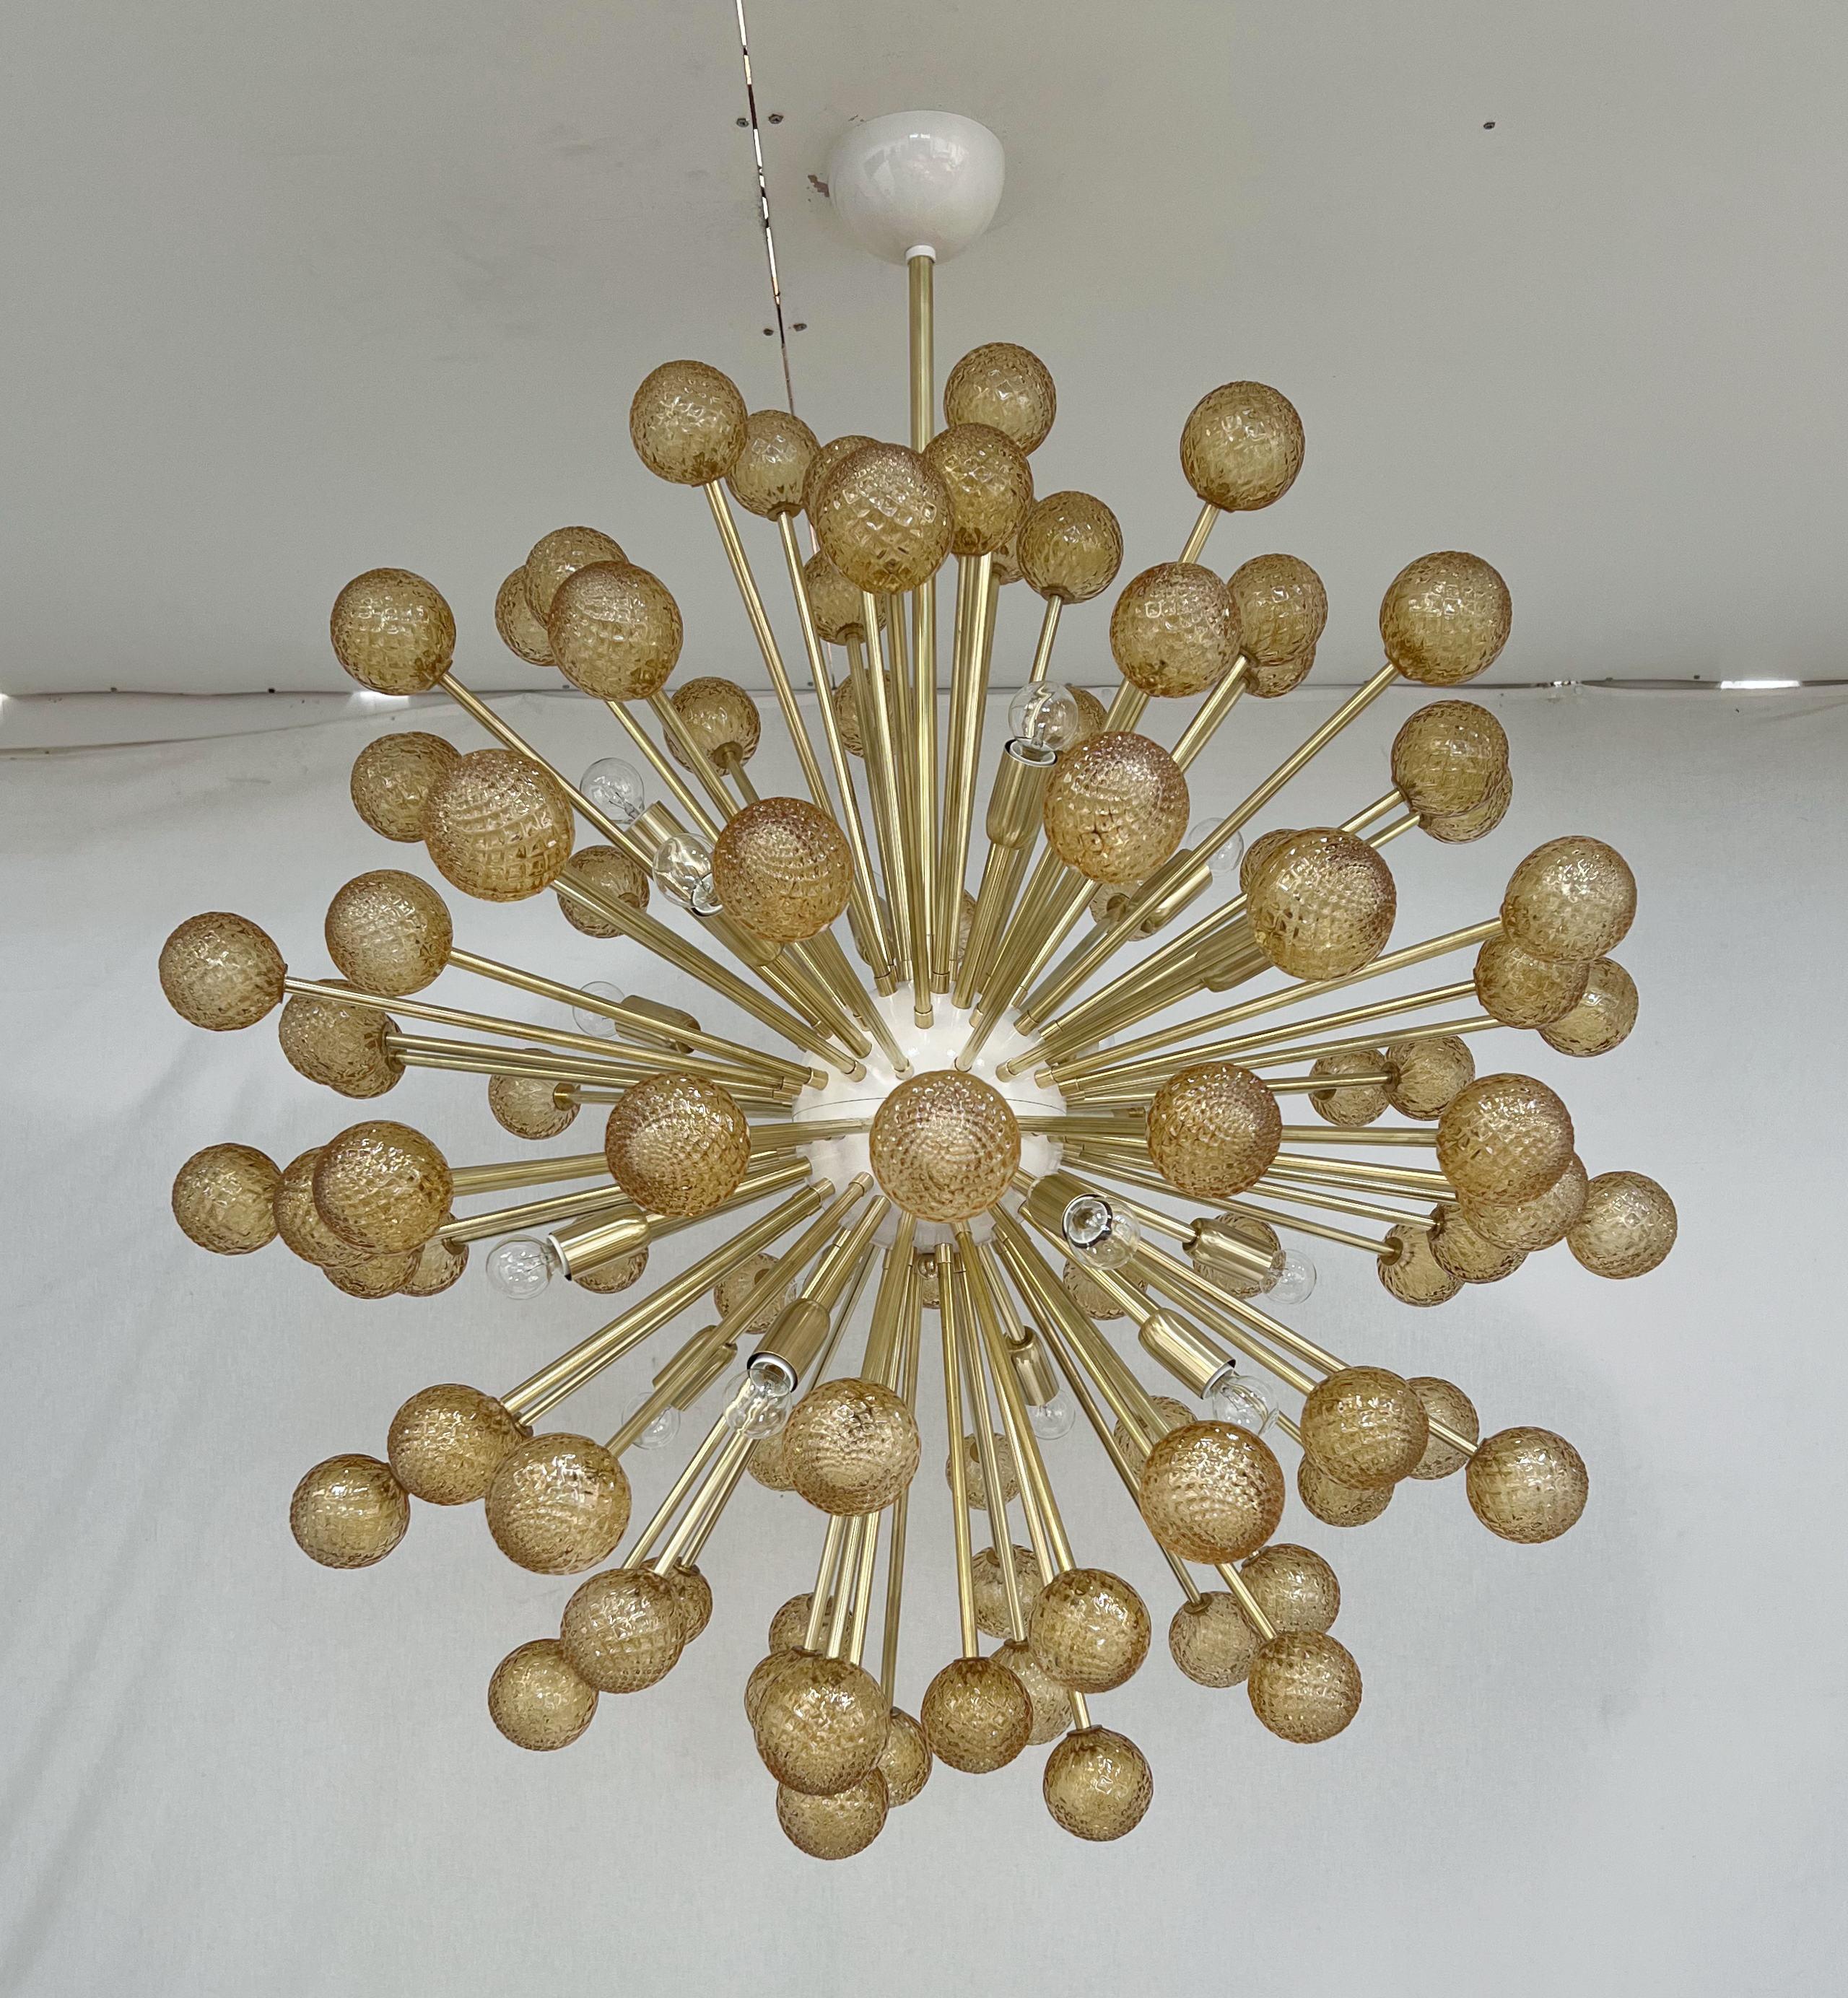 Italian modern sputnik chandelier with hand blown textured amber Murano glass spheres, mounted on unlacquered natural brass frame with cream enameled center / Designed by Fabio Bergomi for Fabio Ltd / Made in Italy
16 lights / E12 or E14 type / max